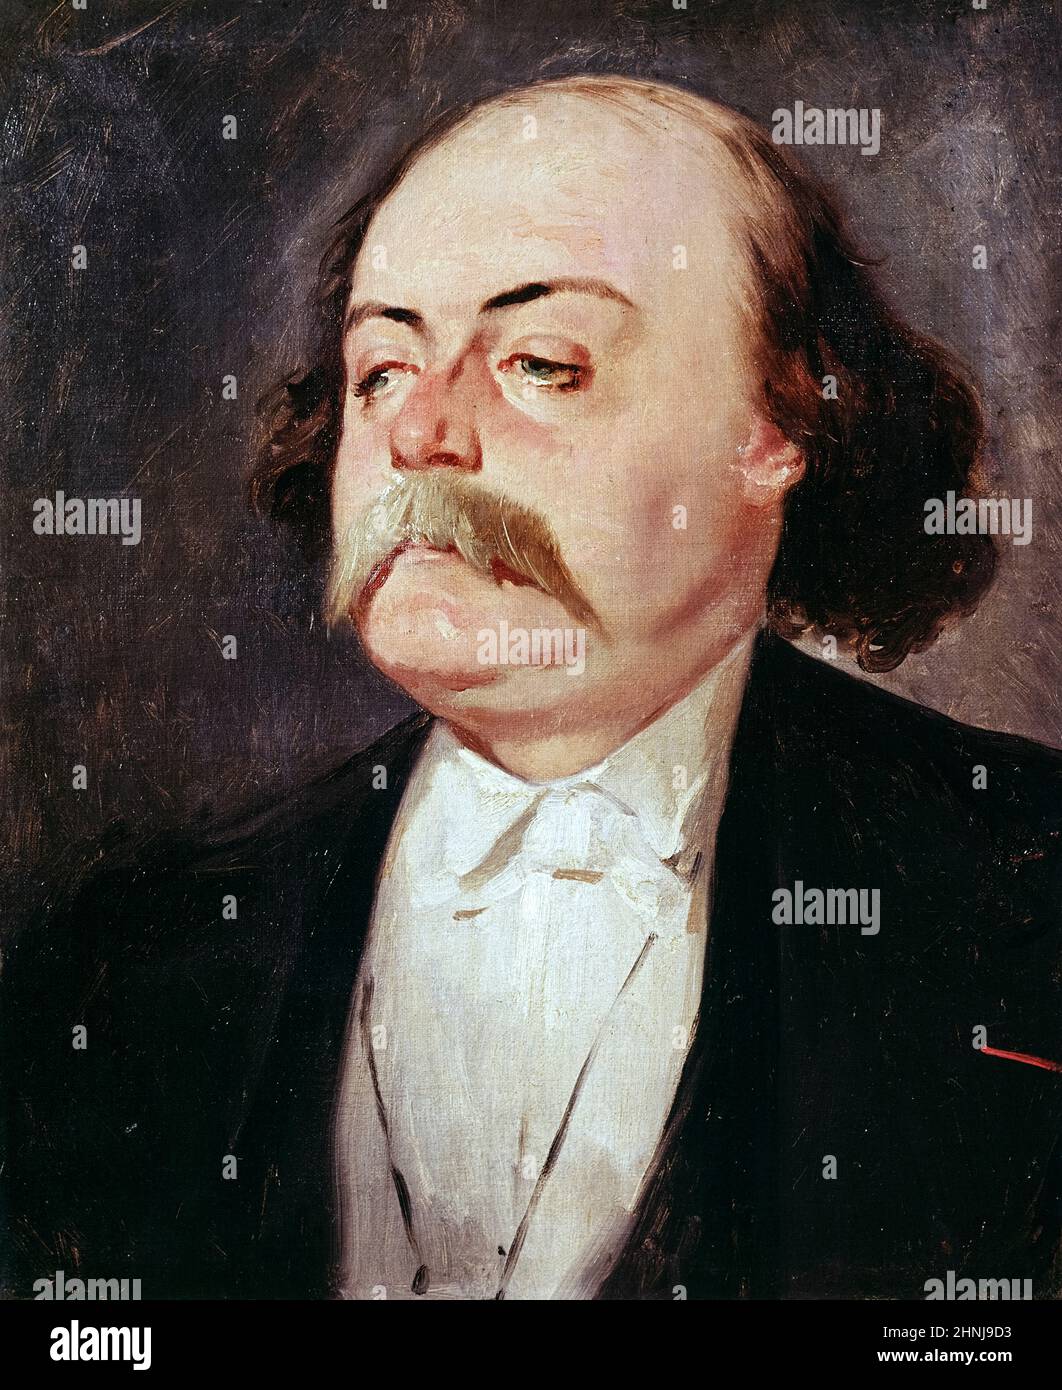 Gustave Flaubert (1821-1880) portrait by French painter Eugène Giraud (1806-1881) circa 1856. Gustave Flaubert was an influential French novelist whose works include Madame Bovary a seminal work of literary realism first published in serial form in 1856. Stock Photo